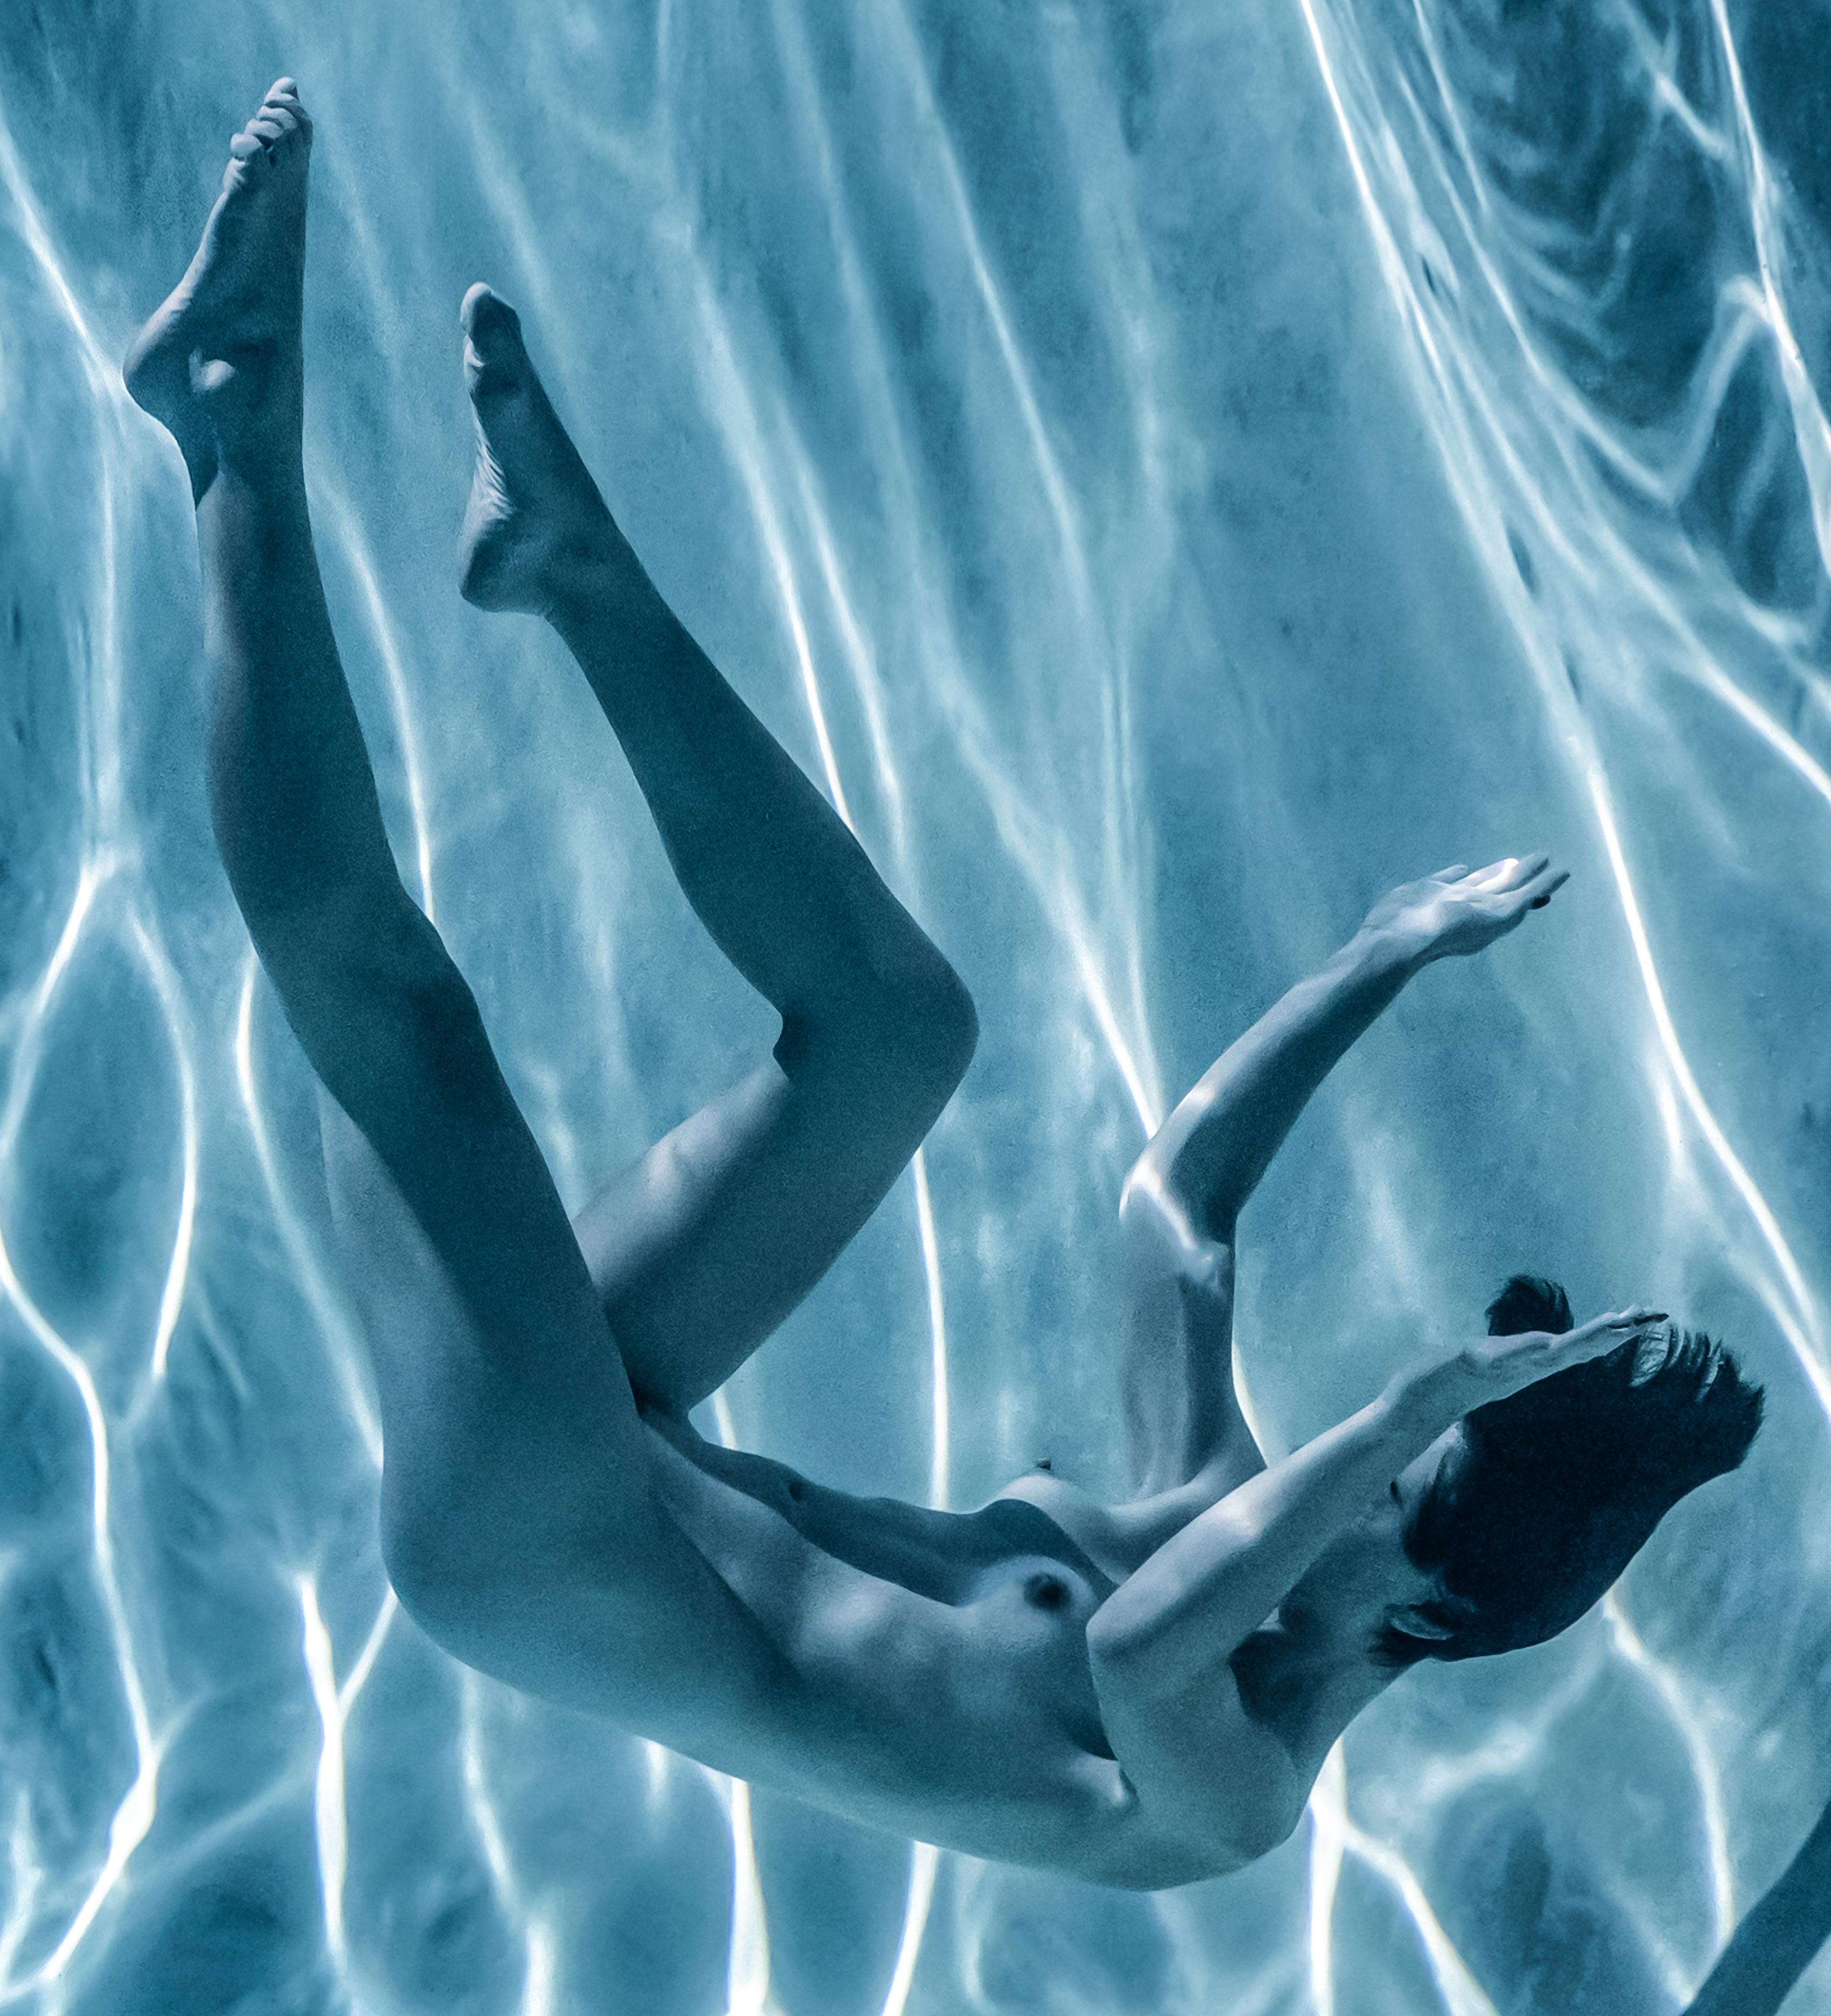 Slow Motion (blue) - underwater nude photograph - archival pigment print - Contemporary Photograph by Alex Sher